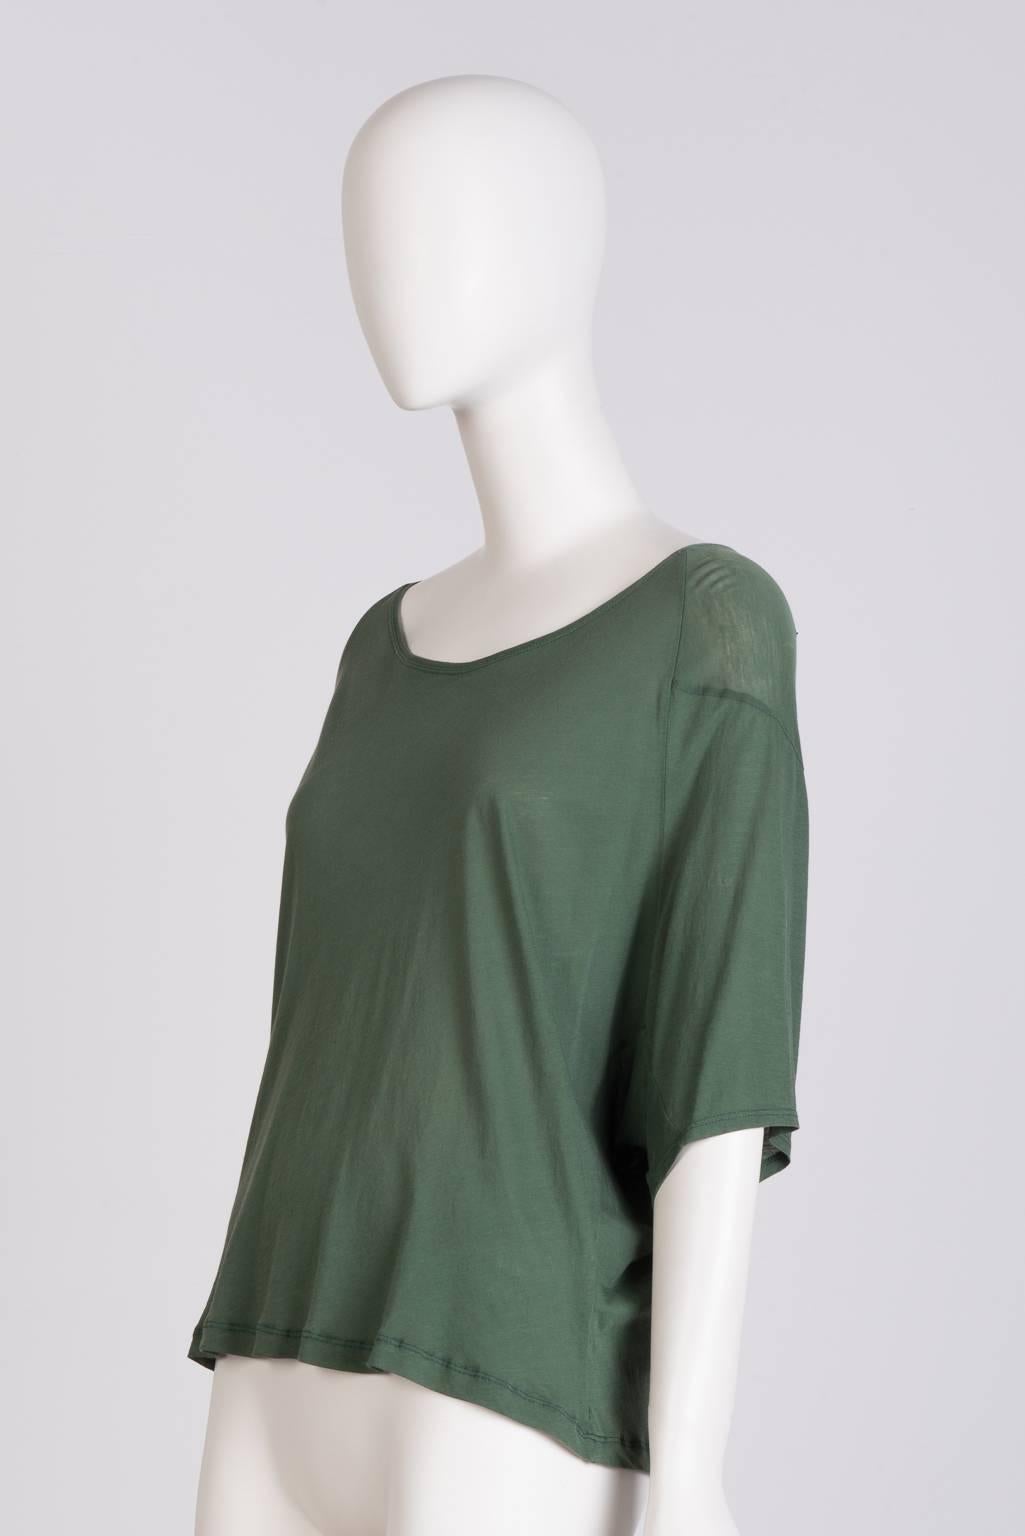  Cotton jersey top with dolman half sleeve.